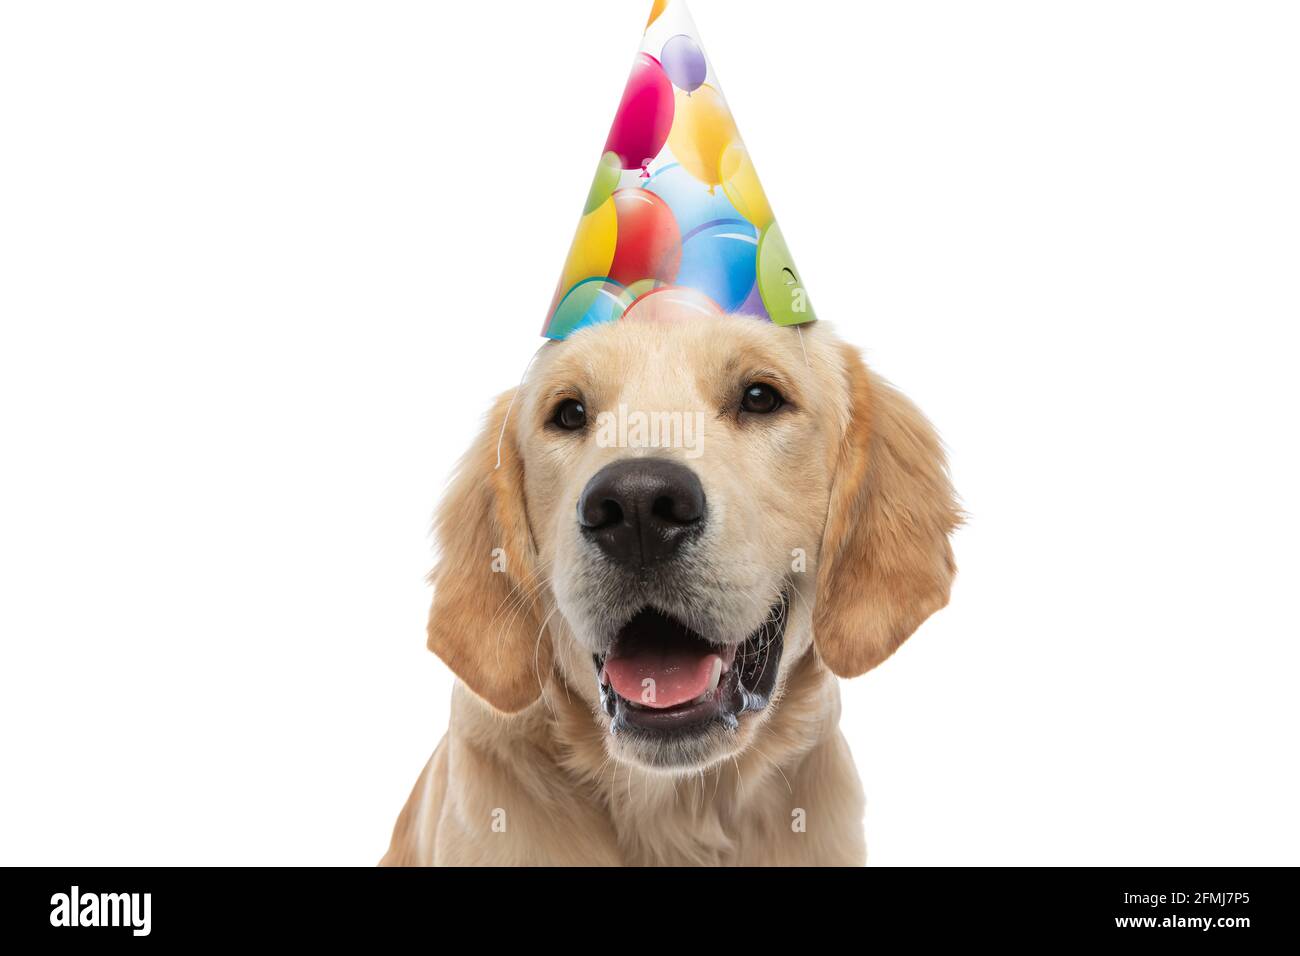 Golden Retriever Wearing Party Hat High Resolution Stock Photography and  Images - Alamy